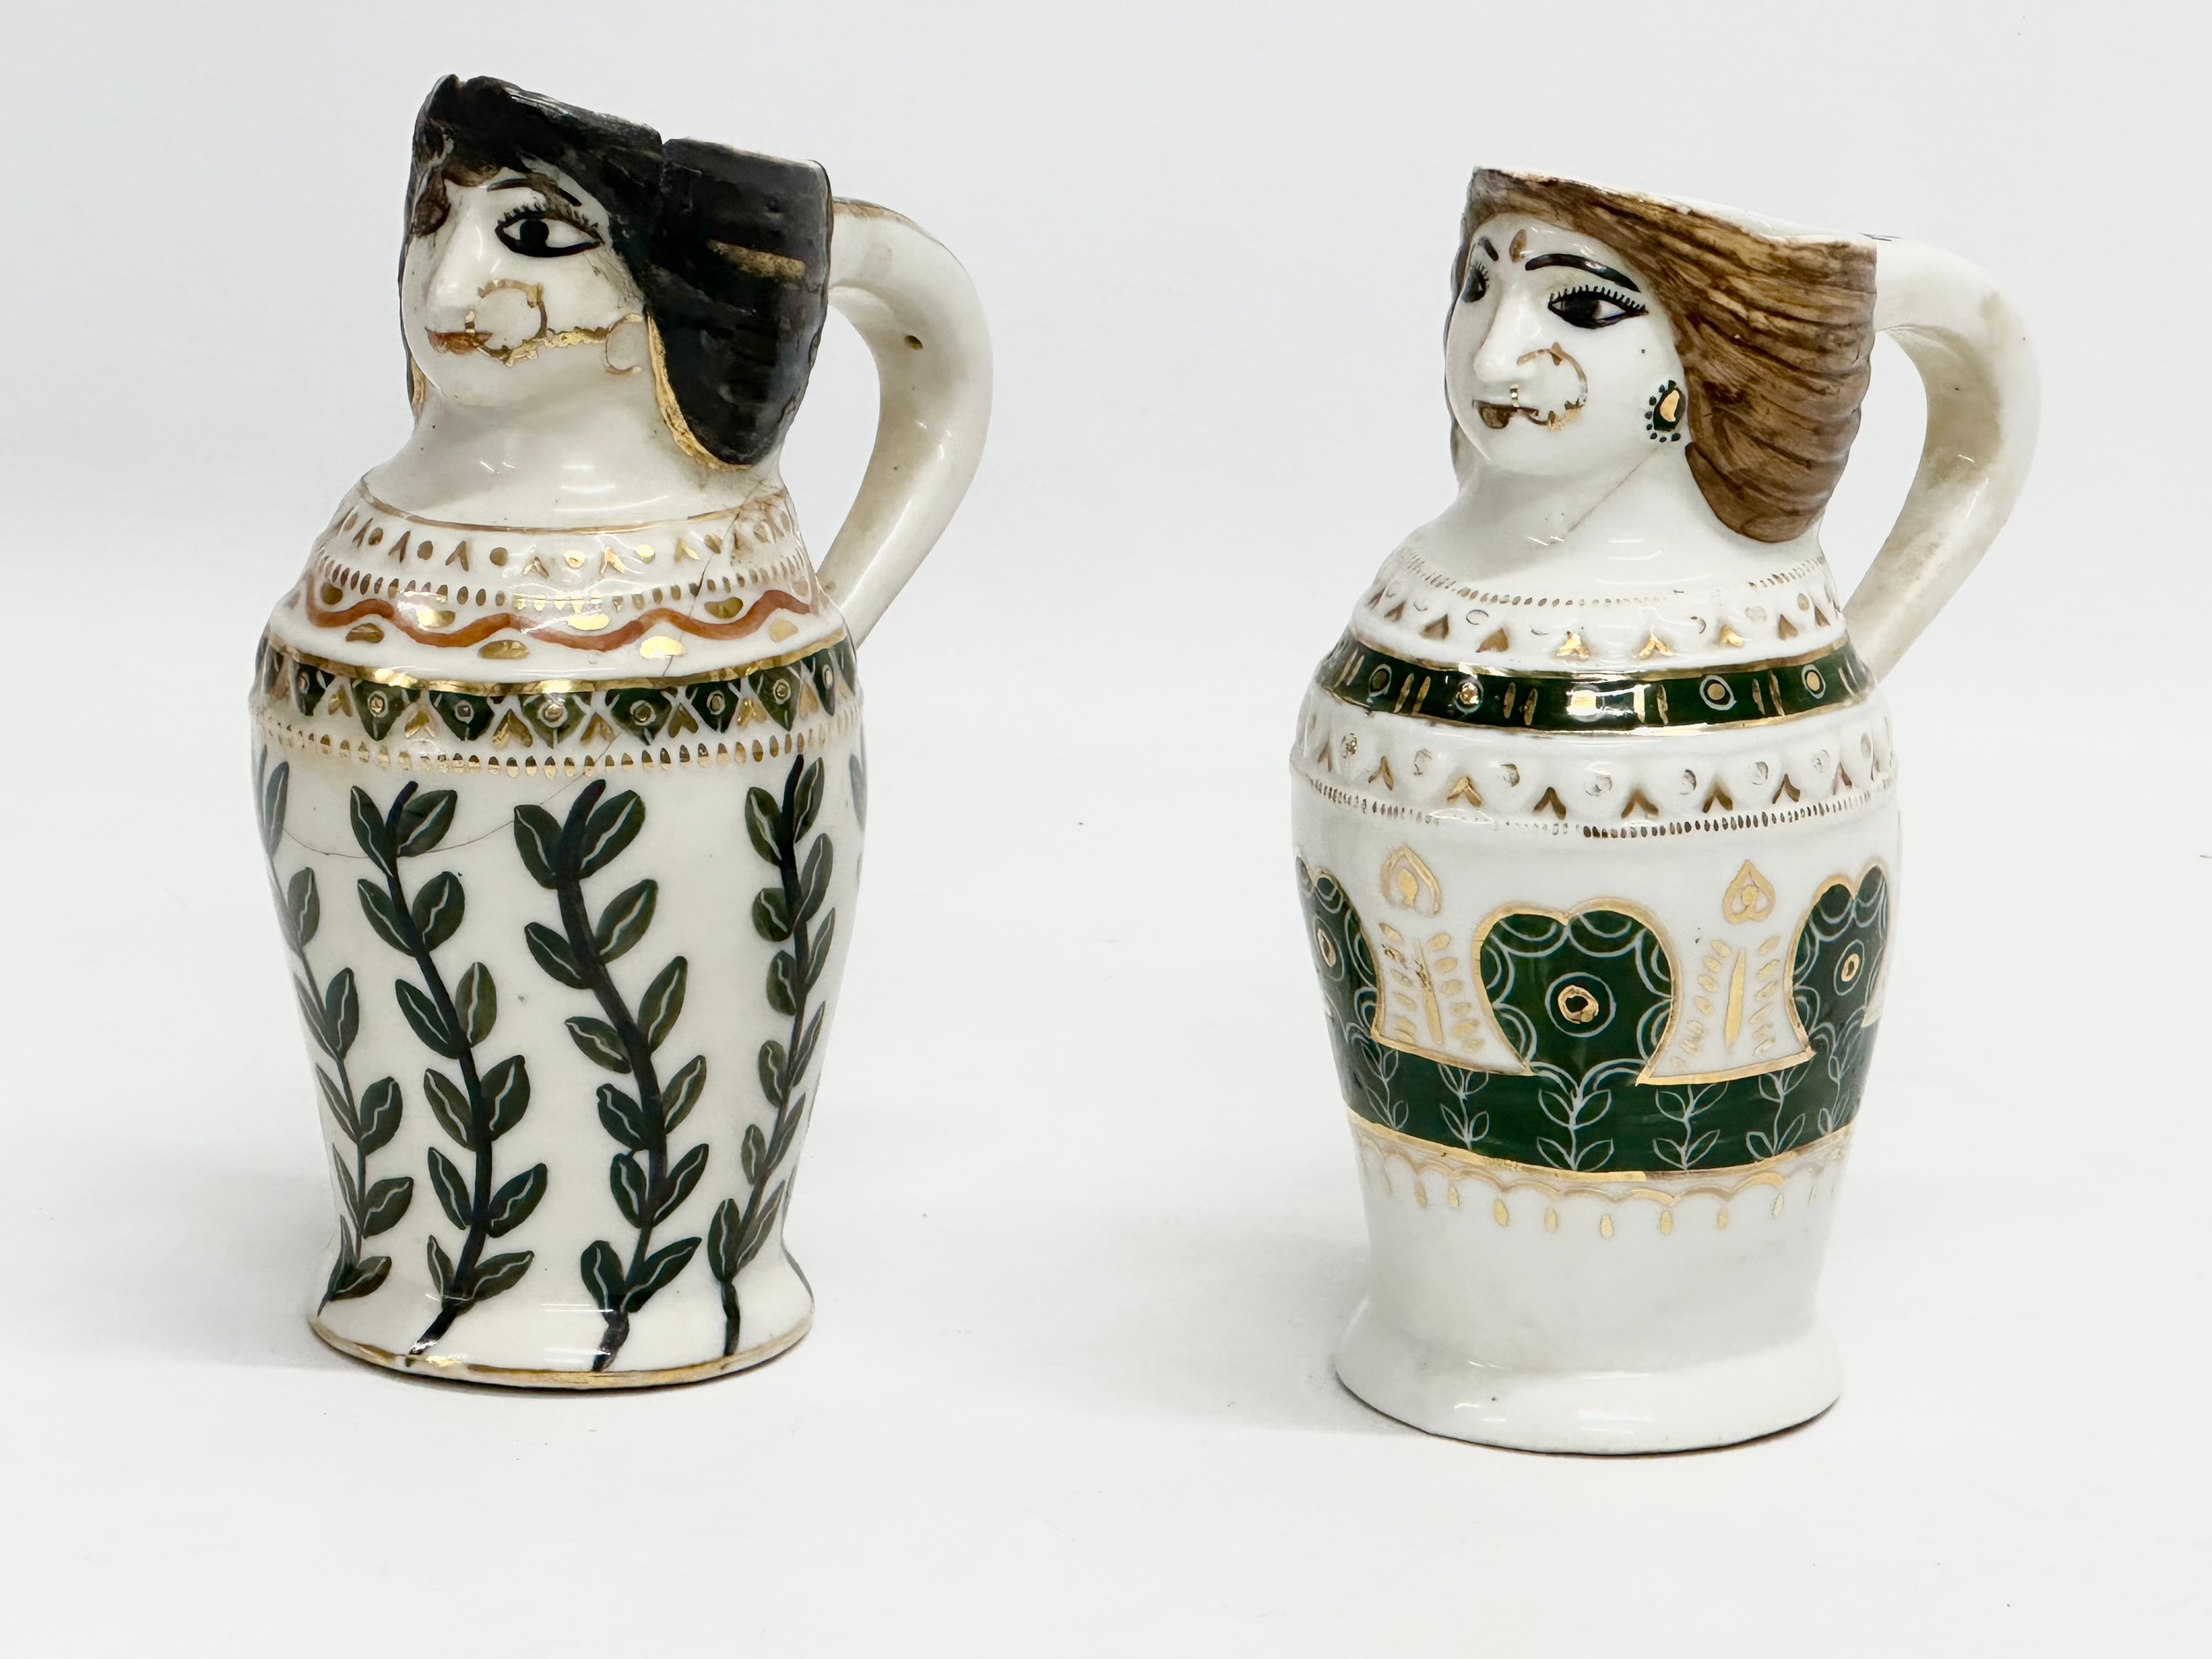 A pair of late 19th century gypsy character jug. 1 stamped B.C.I.T. 11.5x15cm